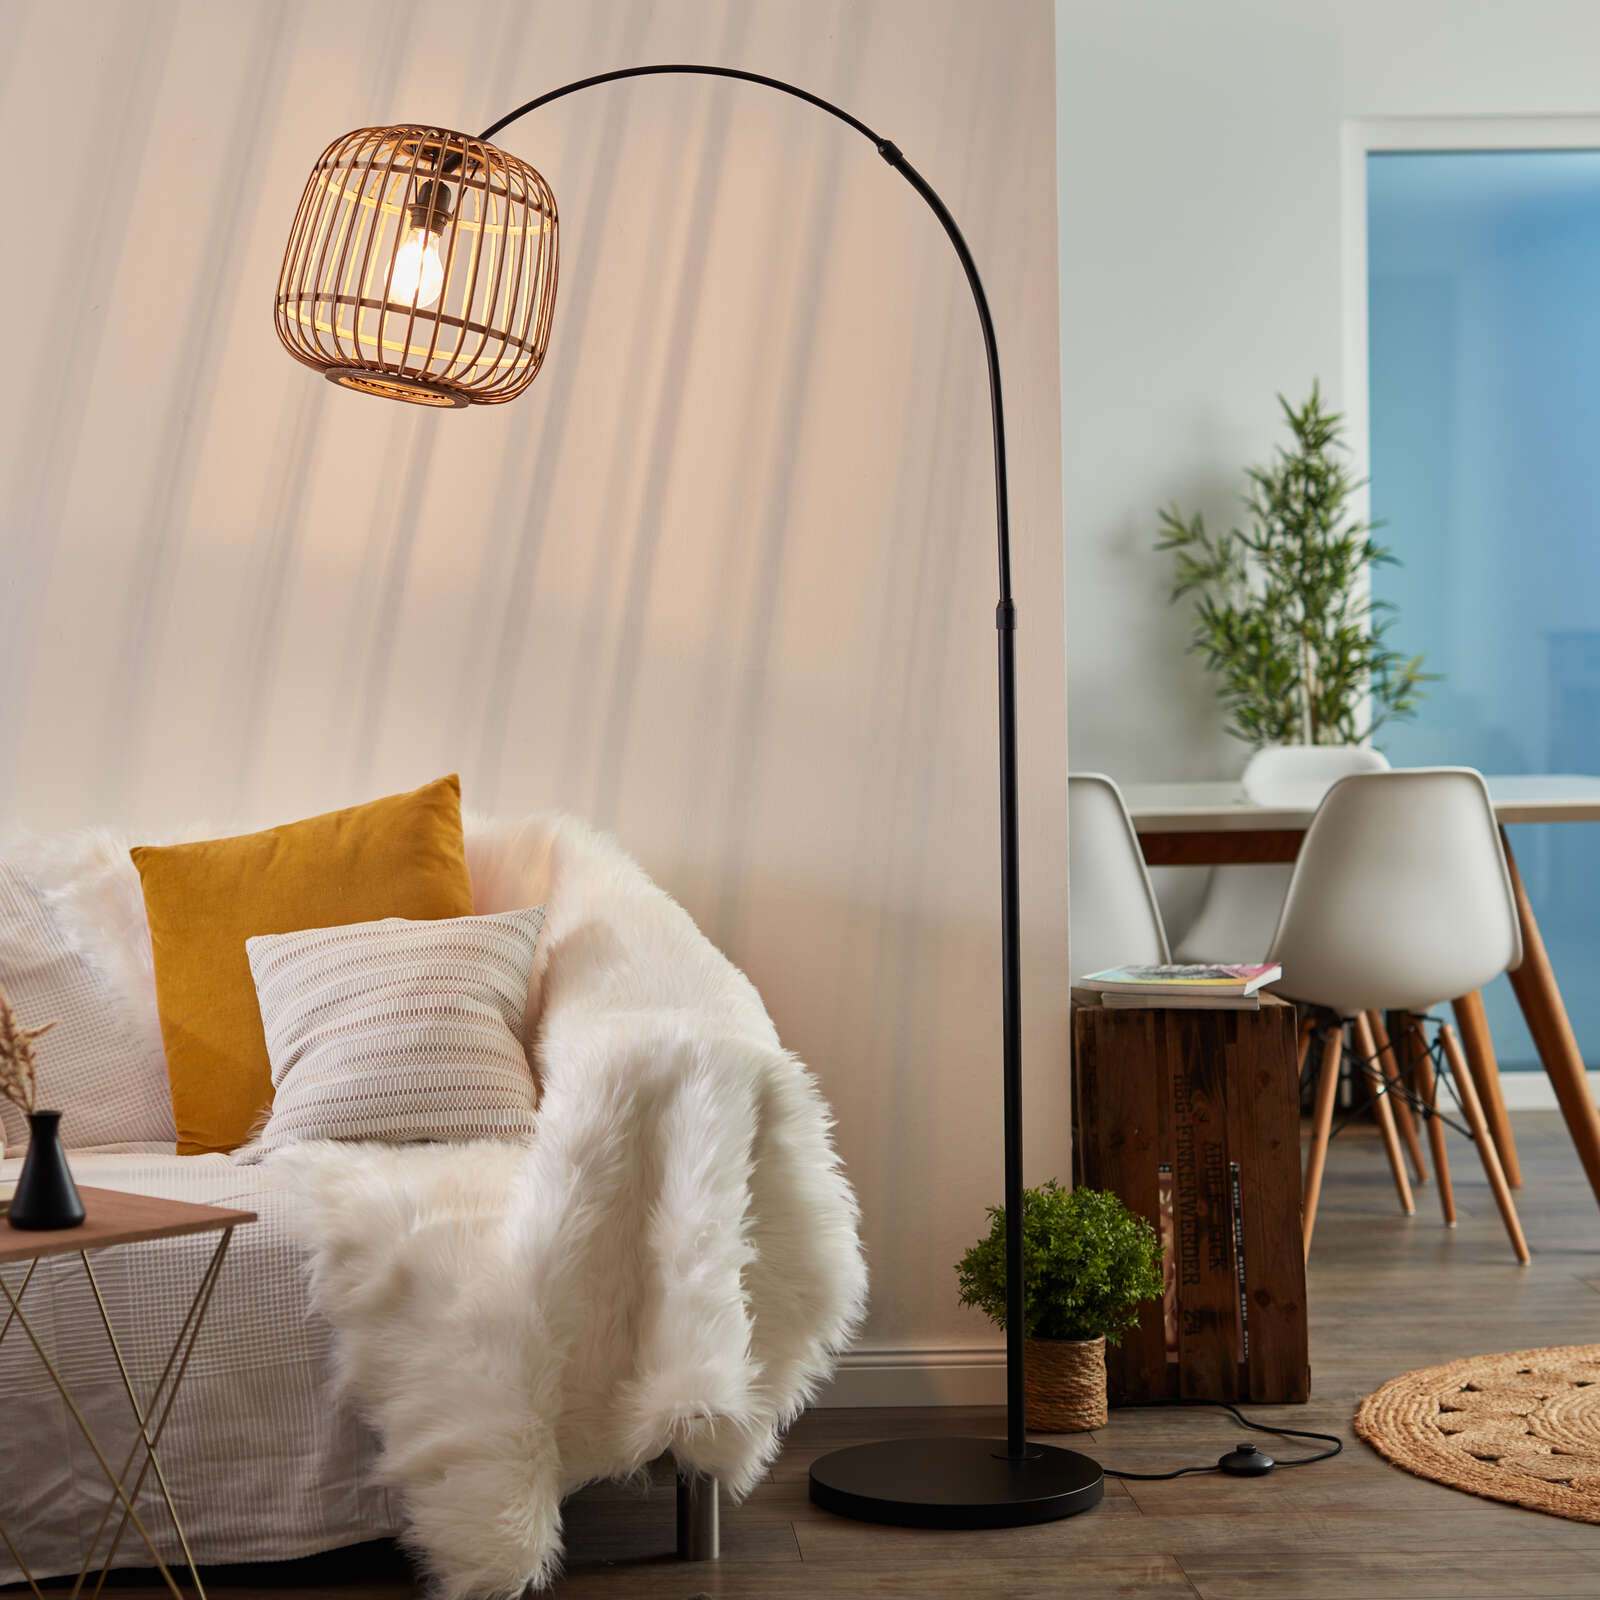             Arched rattan floor lamp - Lucas 4 - Brown
        